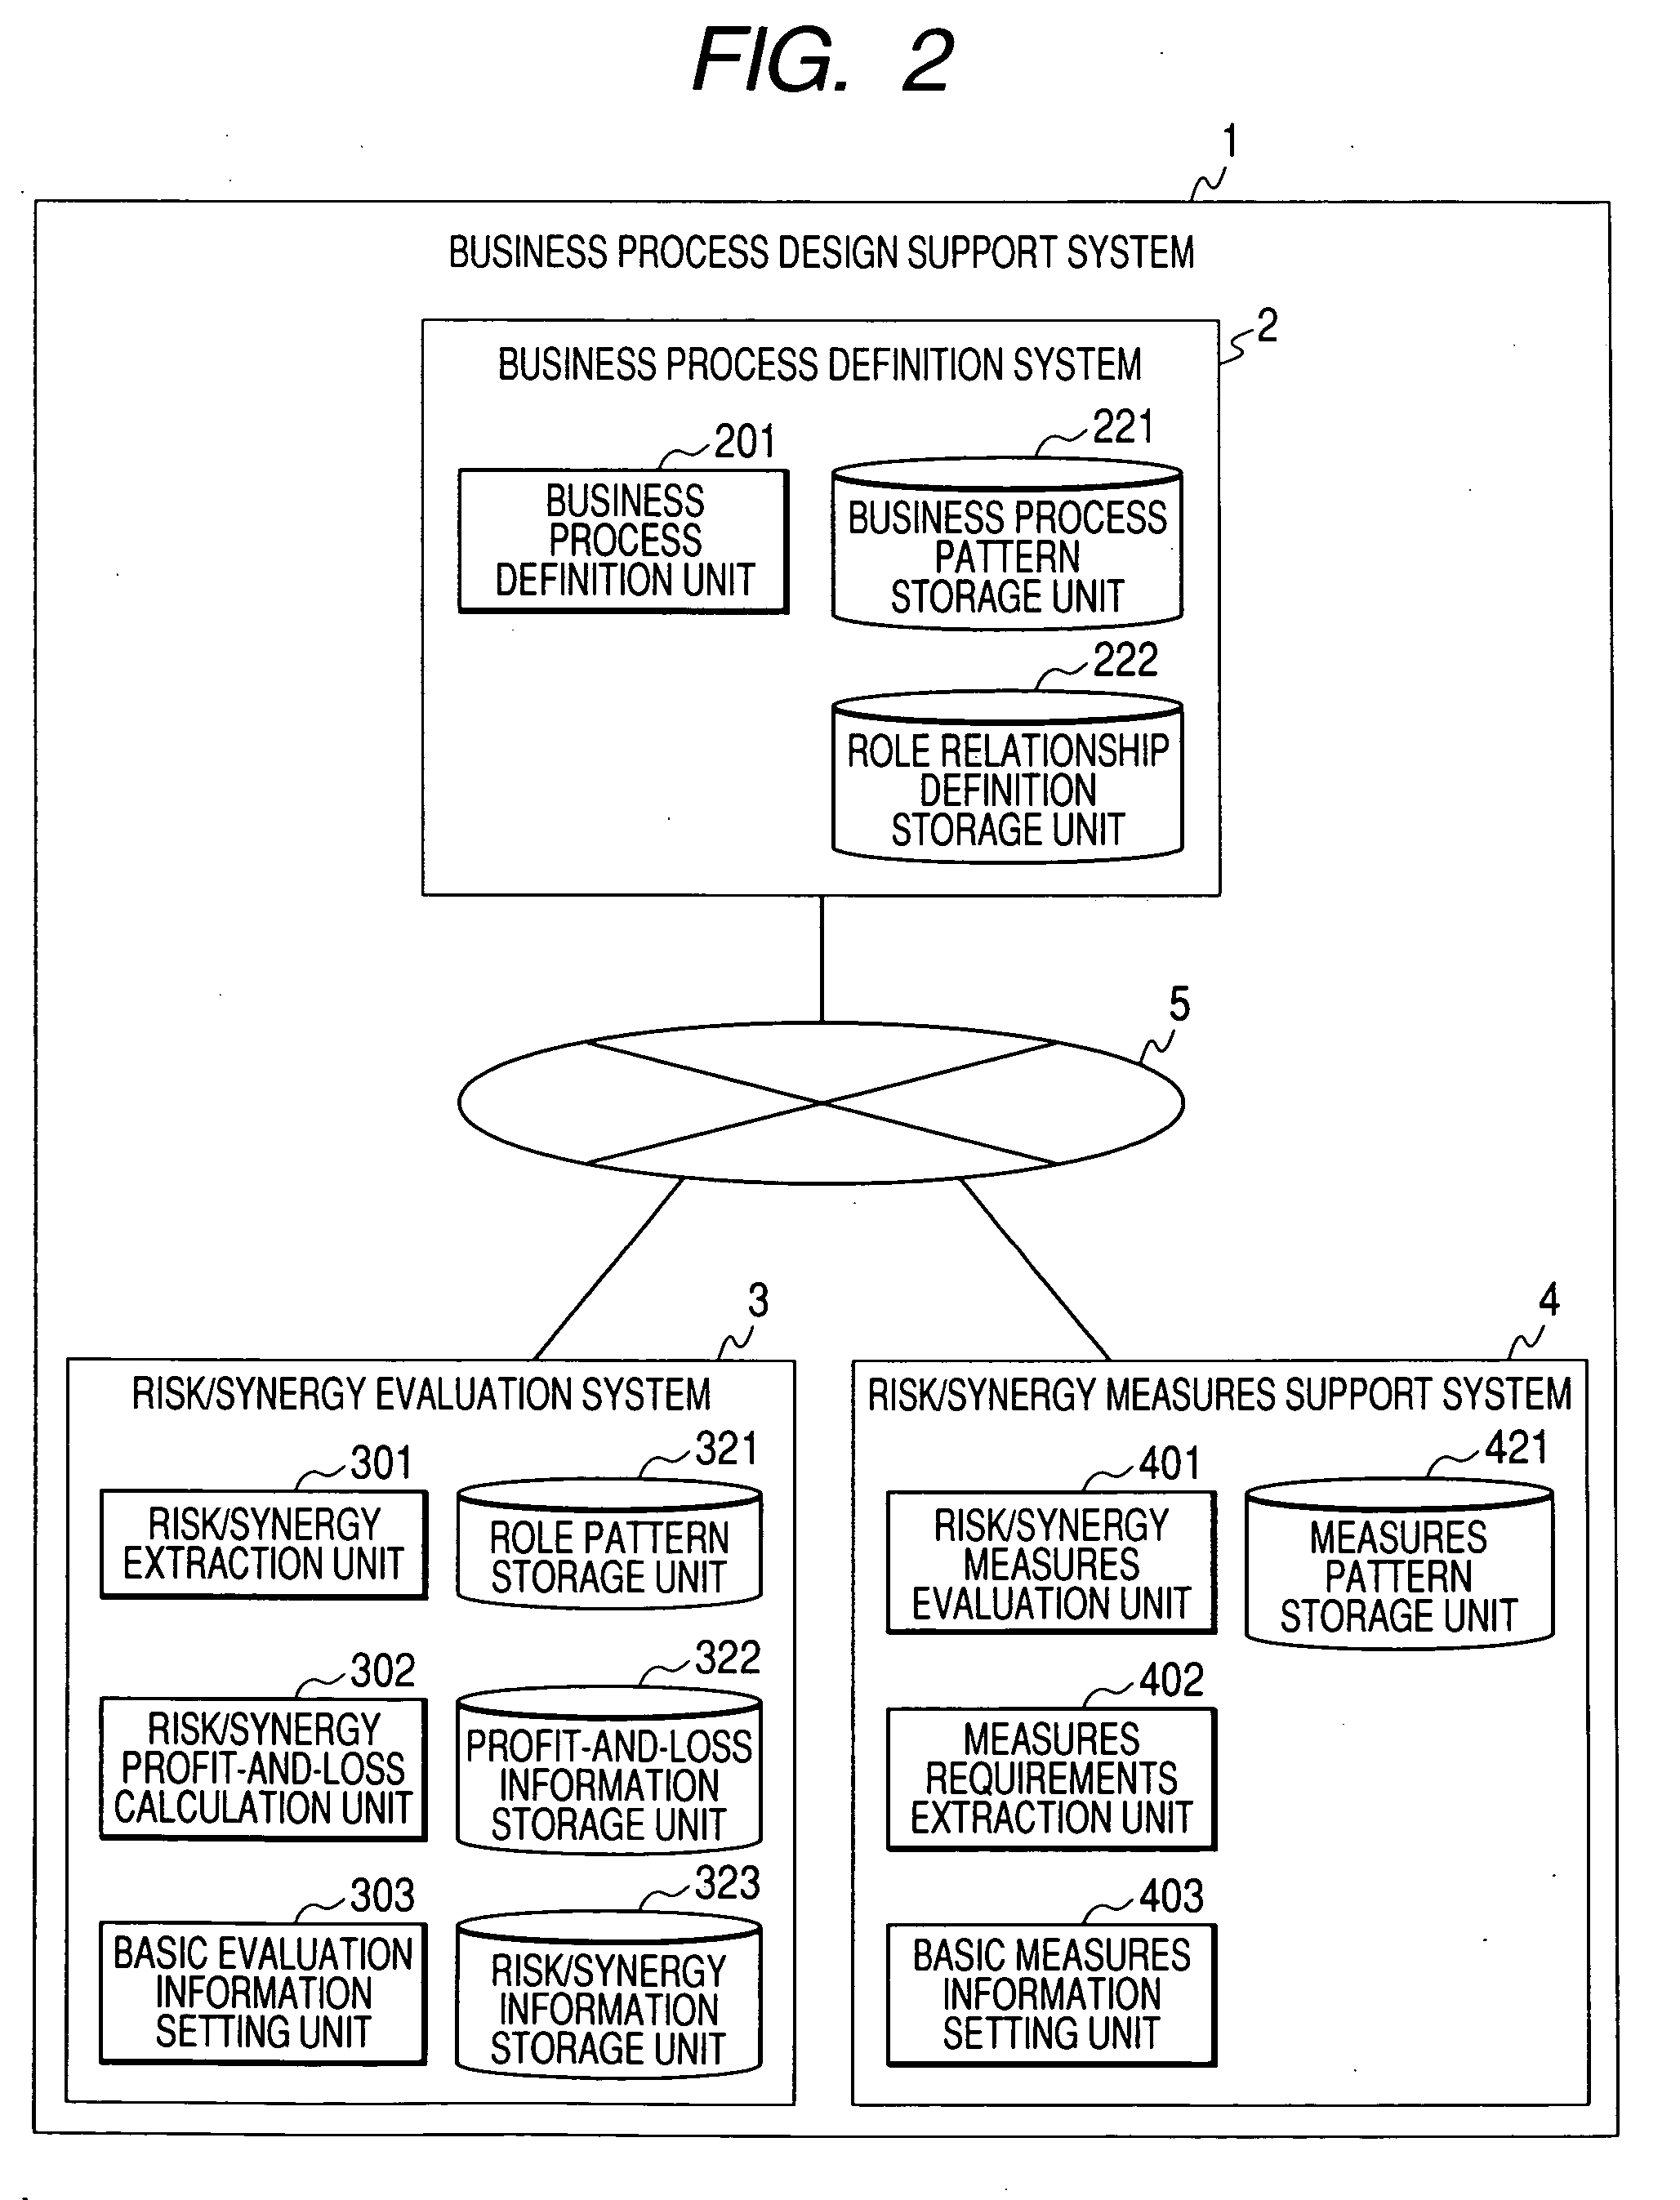 Method and system for supporting business process design by modeling role relationship